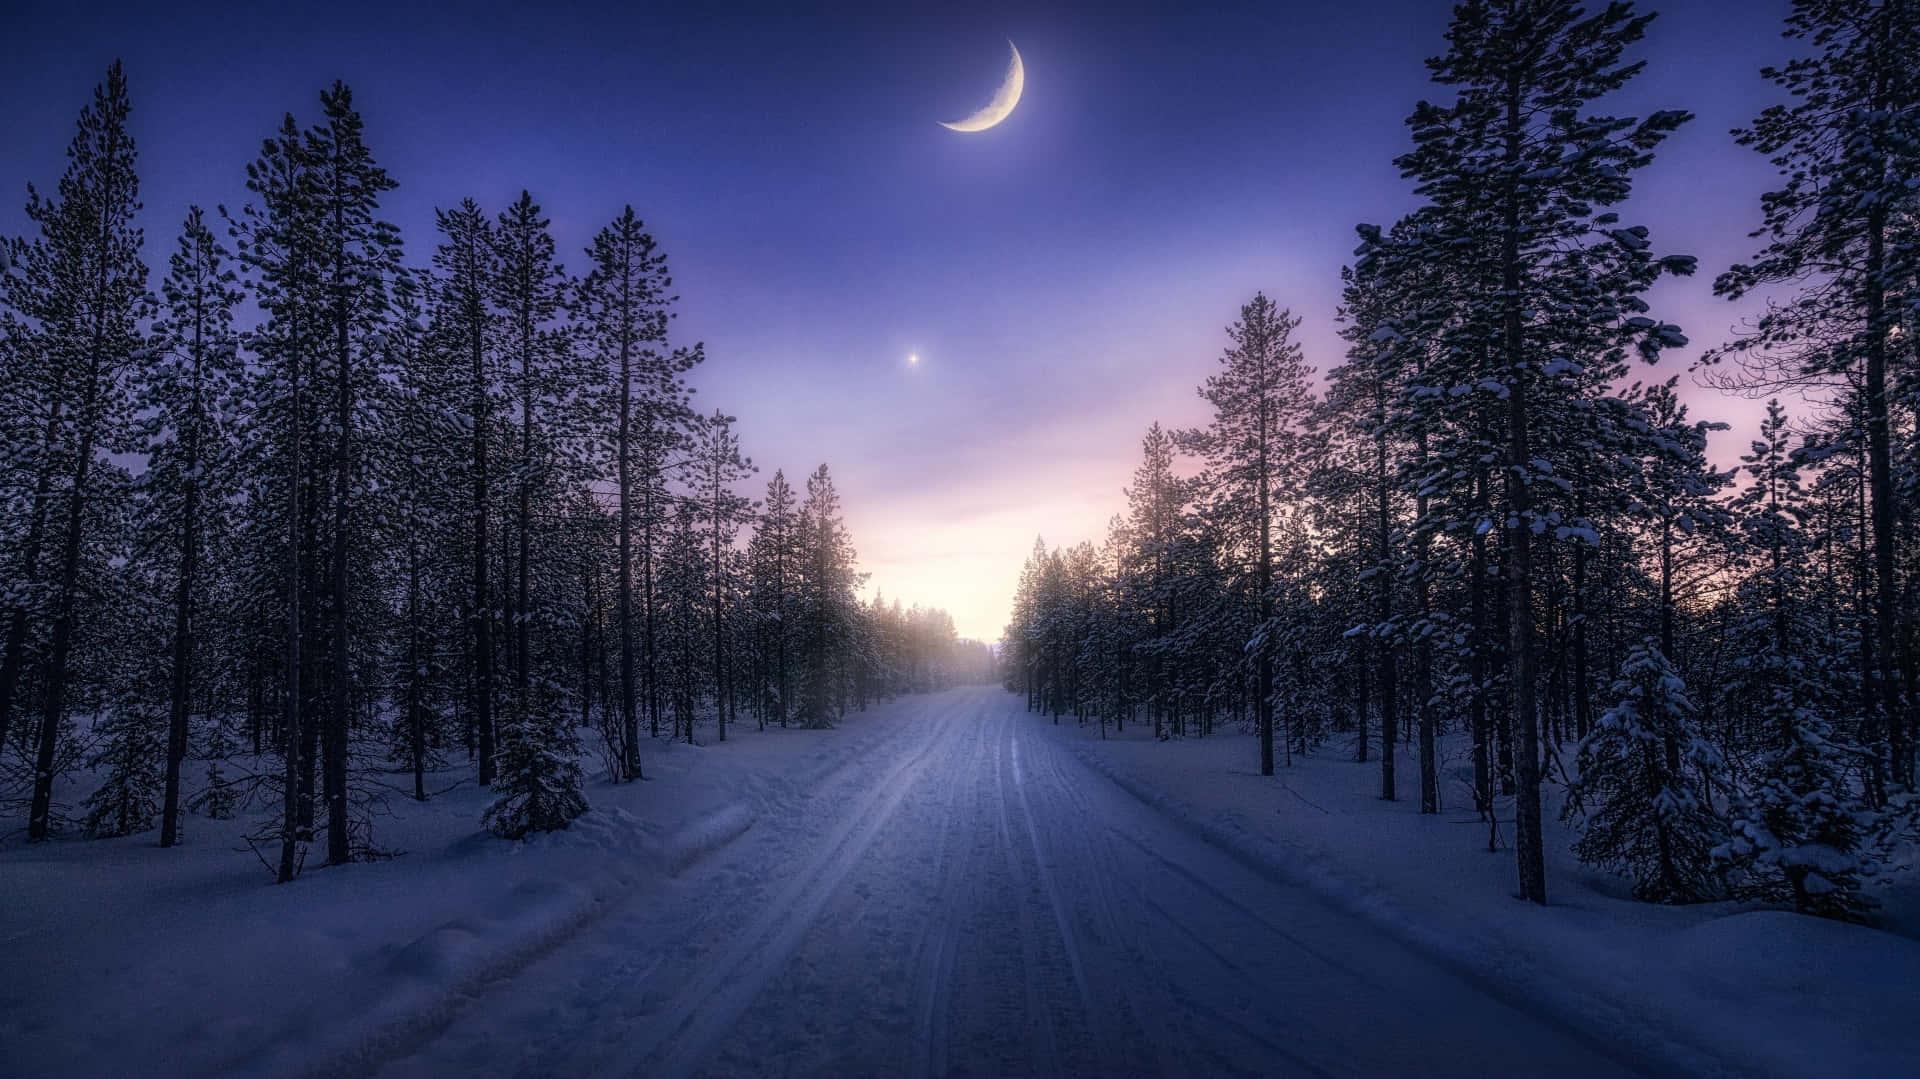 A Road With Trees And Moon In The Sky Wallpaper